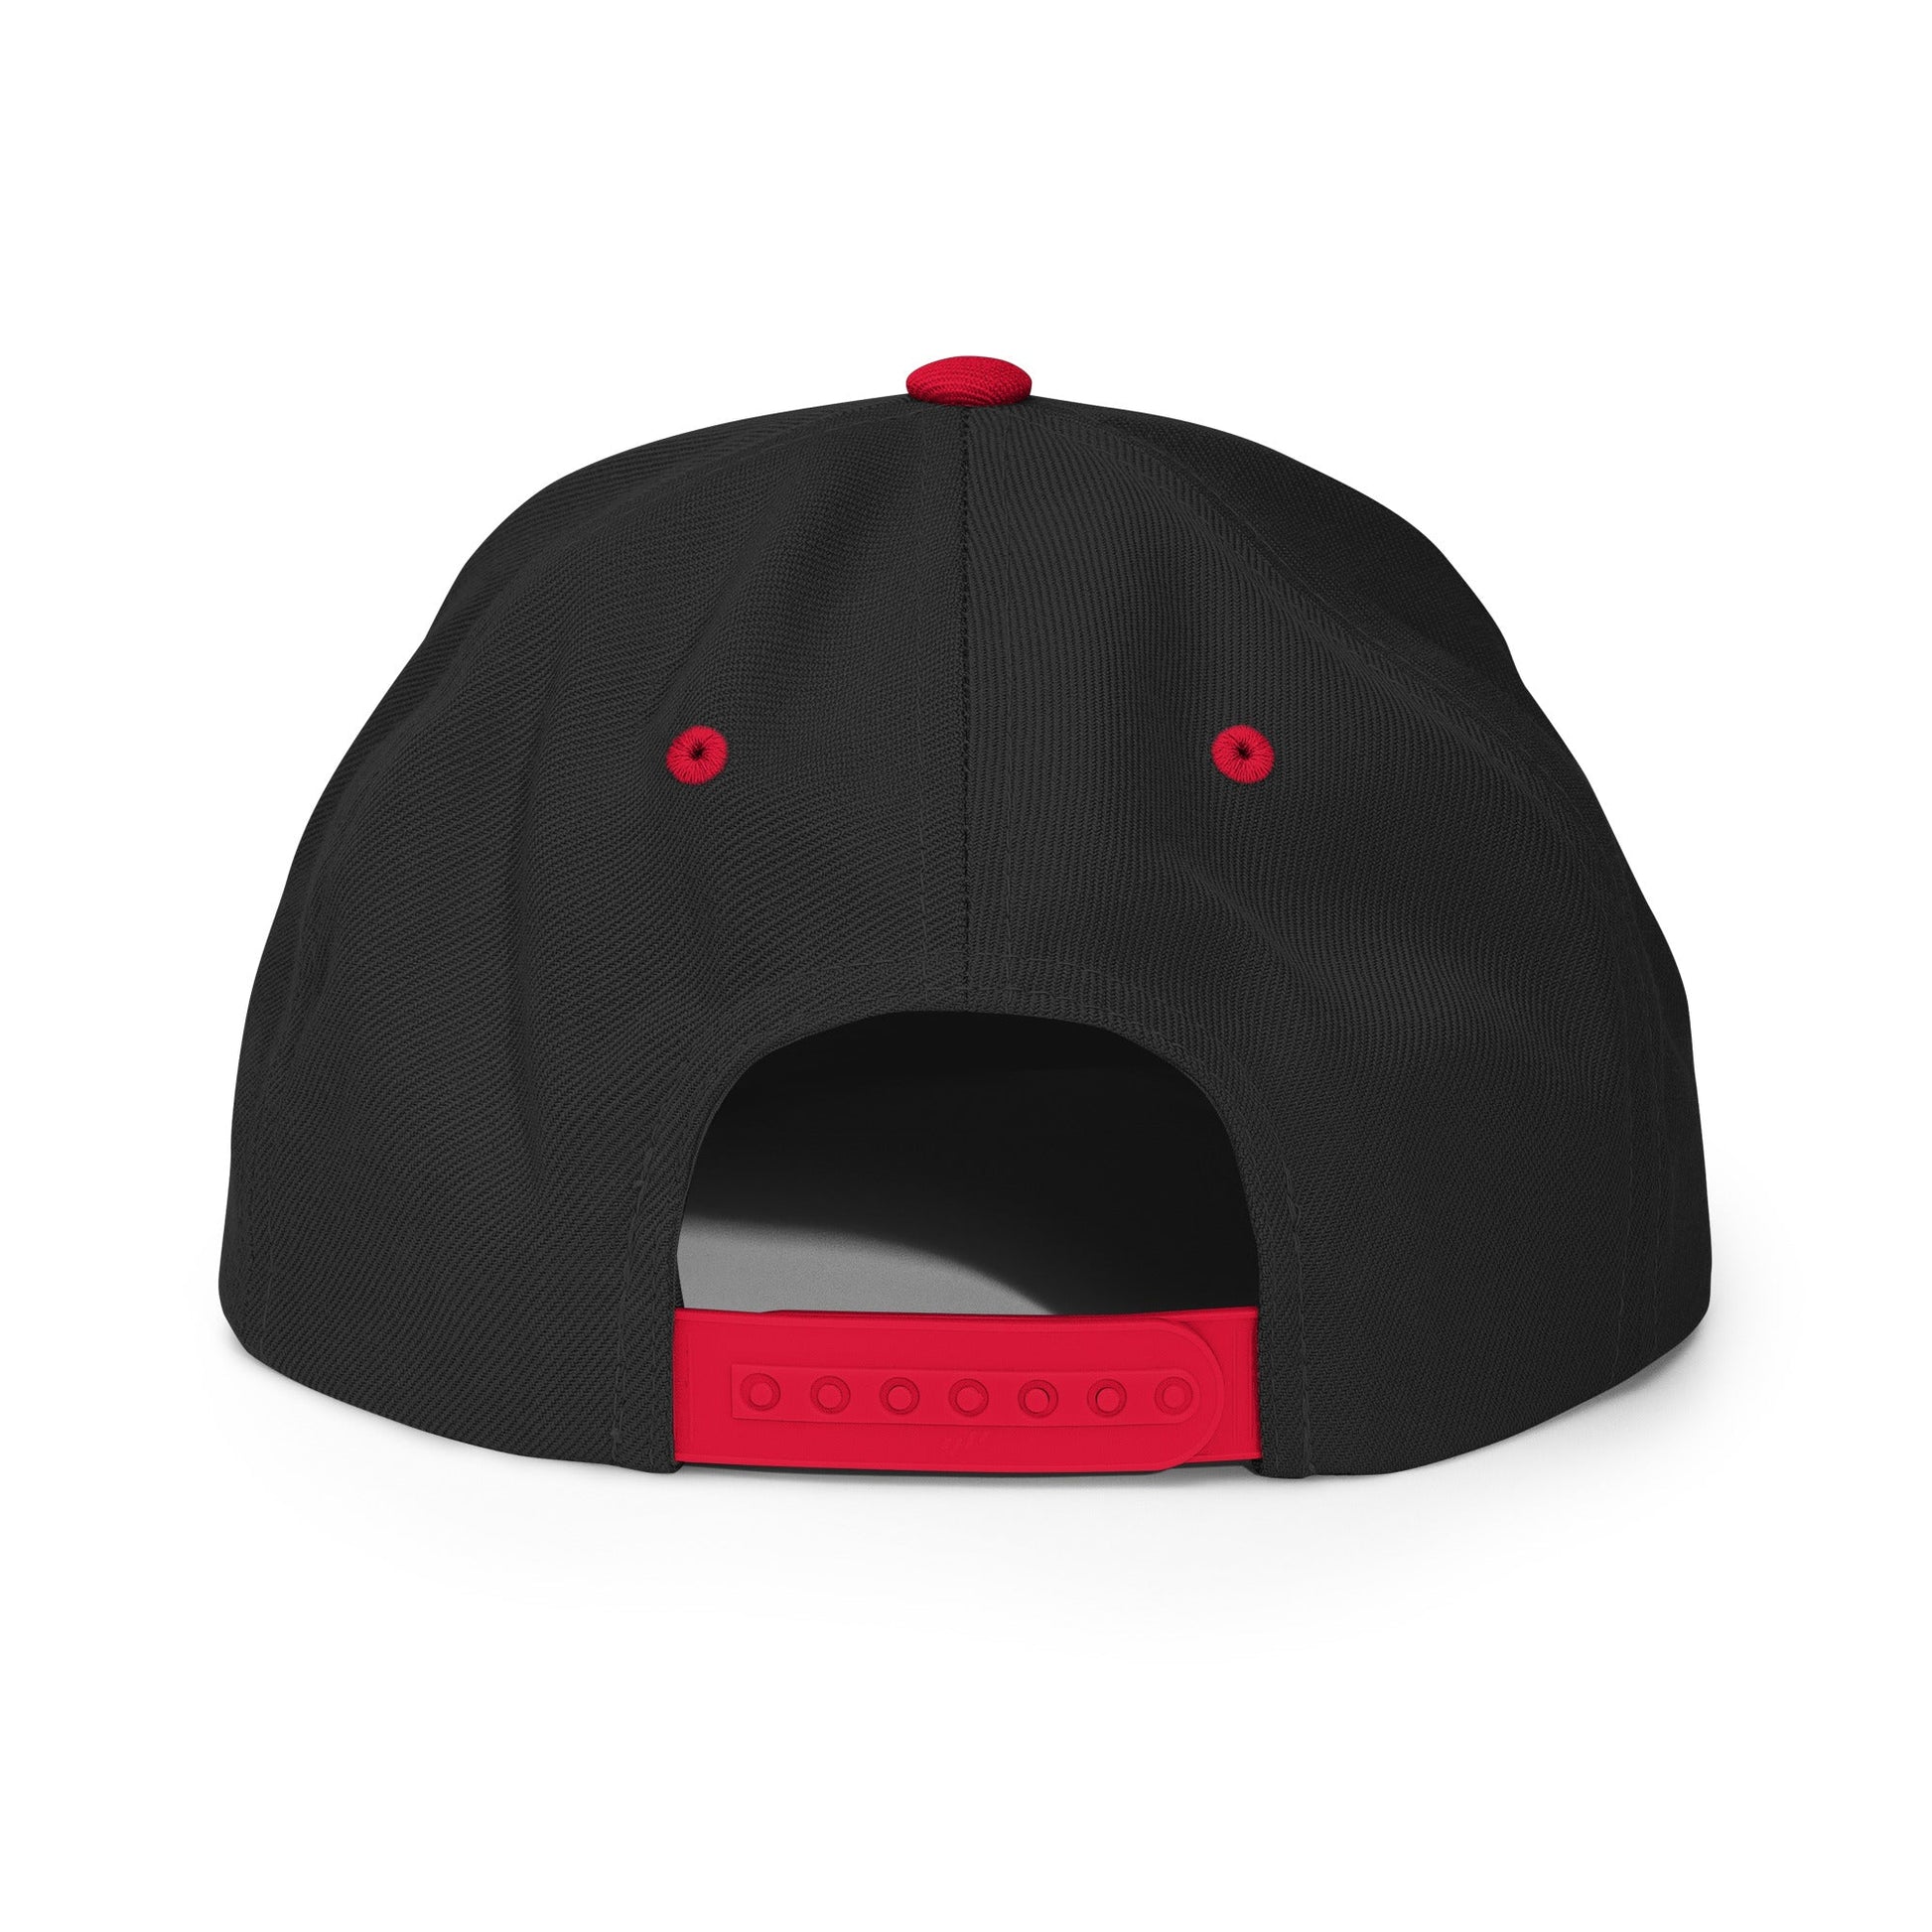 Dad In The Streets Daddy In The Sheets Snapback Hat Black Red